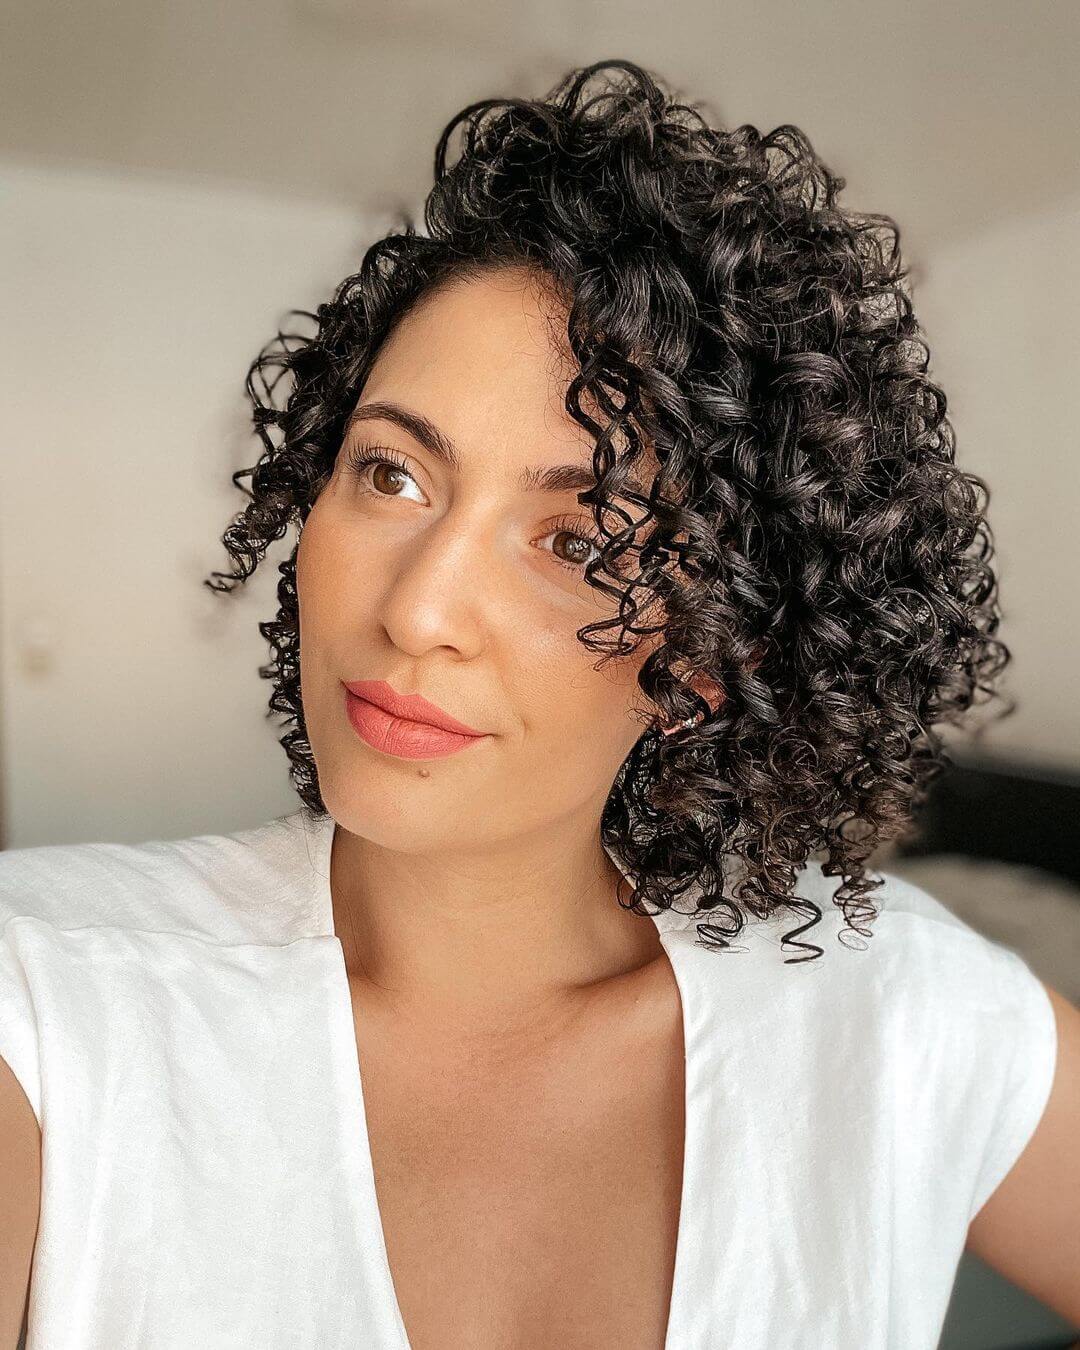 Short Curly Hairstyle for Women Side Parted Curly Layered Bob - Spiral Bob